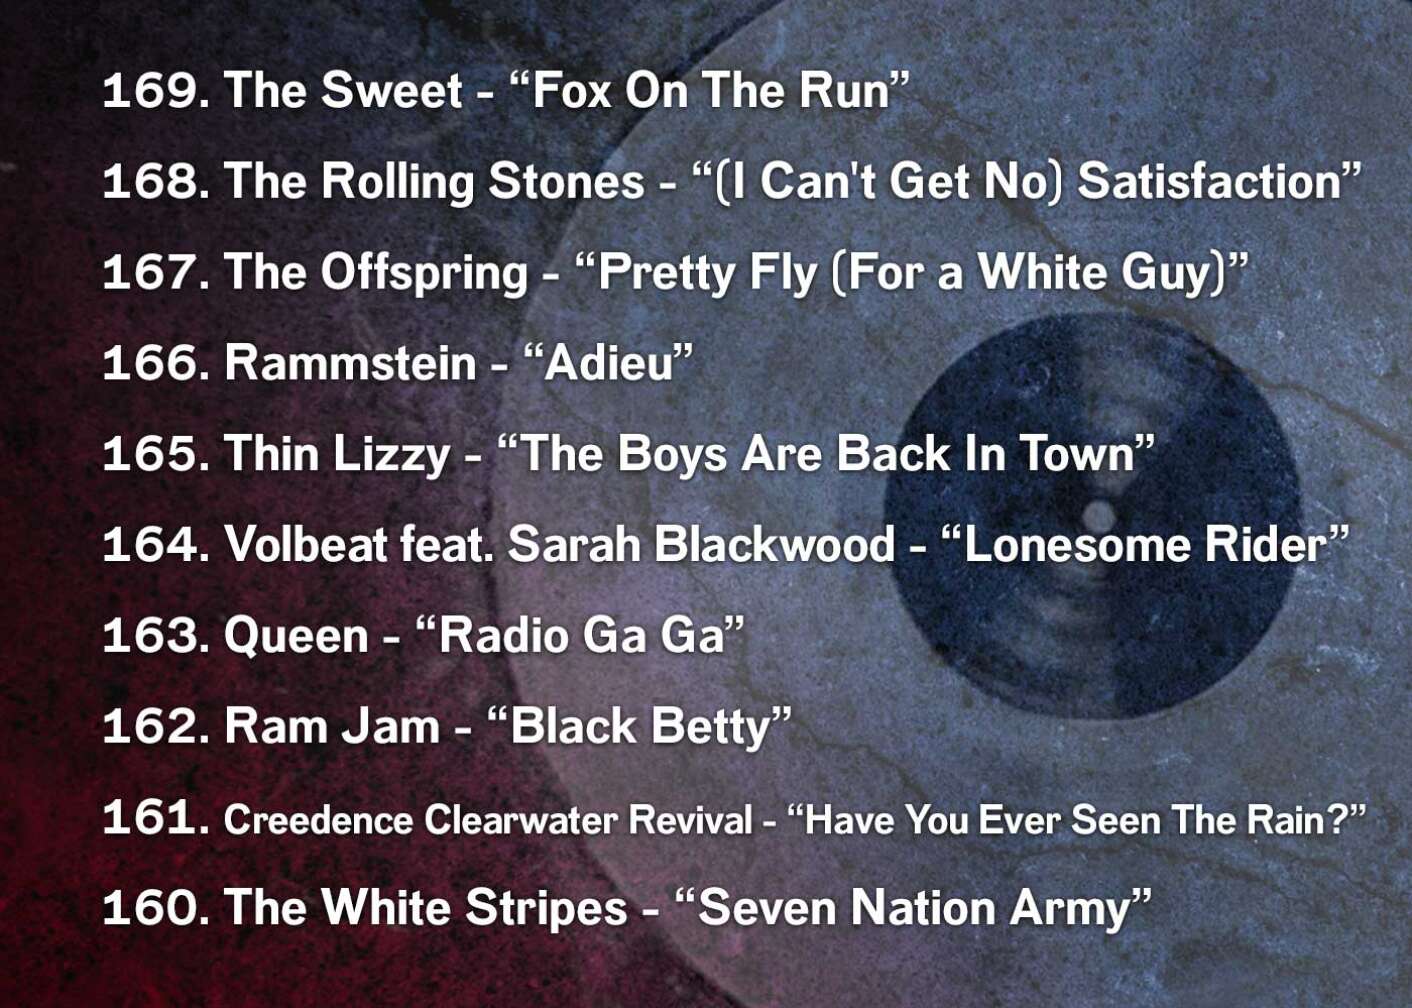 169. The Sweet - “Fox On The Run” 168. The Rolling Stones - “(I Can't Get No) Satisfaction” 167. The Offspring - “Pretty Fly (For a White Guy)” 166. Rammstein - “Adieu” 165. Thin Lizzy - “The Boys Are Back In Town” 164. Volbeat feat. Sarah Blackwood - “Lonesome Rider” 163. Queen - “Radio Ga Ga” 162. Ram Jam - “Black Betty” 161. Creedence Clearwater Revival - “Have You Ever Seen The Rain?” 160. The White Stripes - “Seven Nation Army”